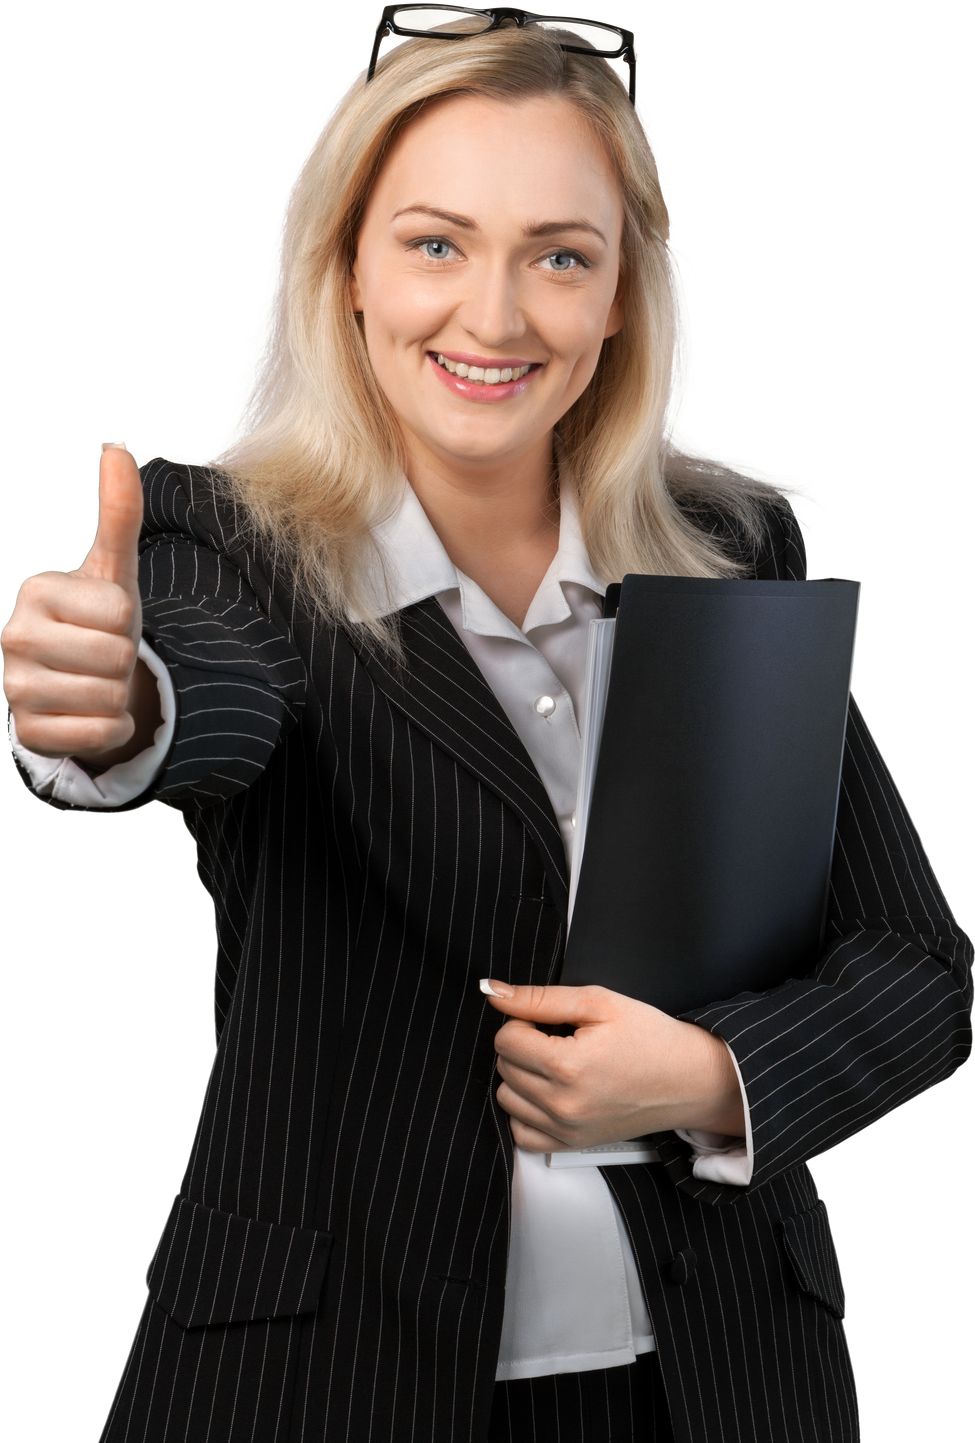 Woman Wearing an Office Attire Posing with a Thumbs Up